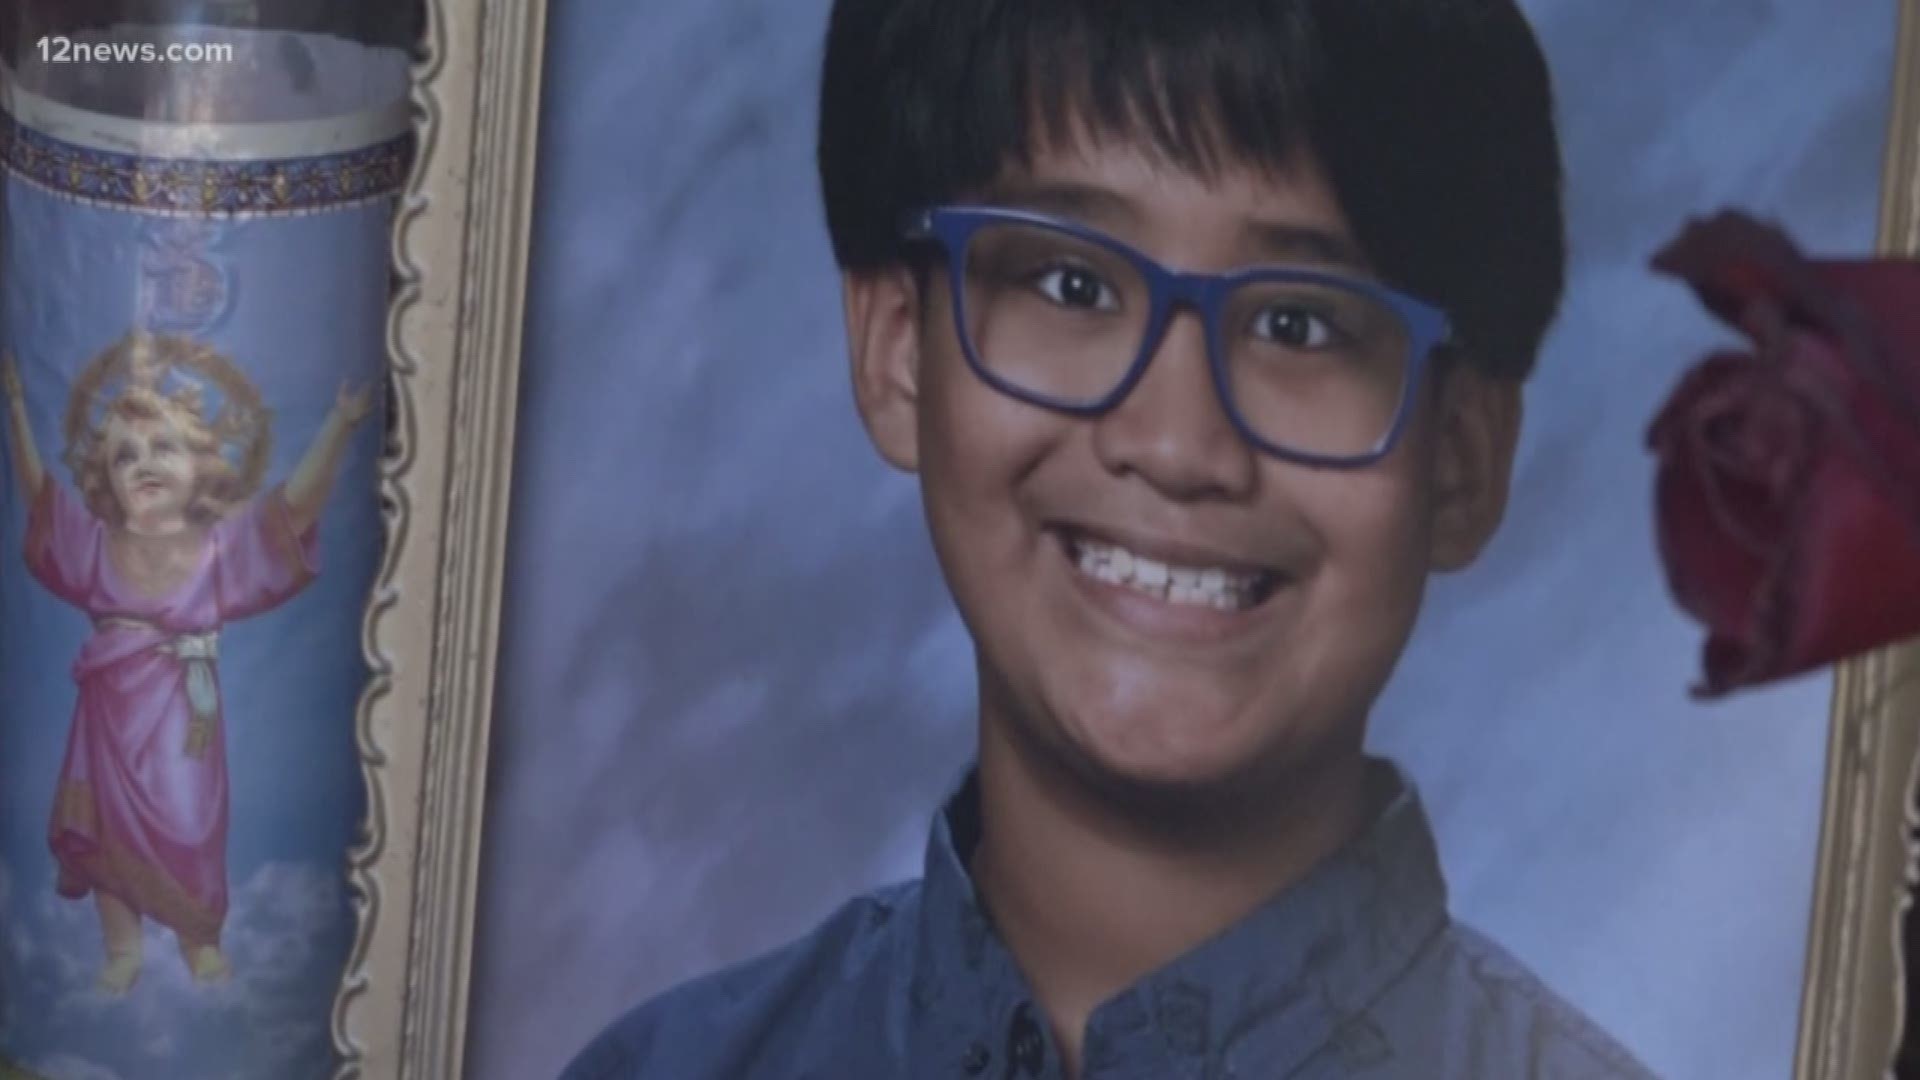 The 10-year-old boy killed after his quad crashed into a parked car was giving his friend a ride home, his parents say.